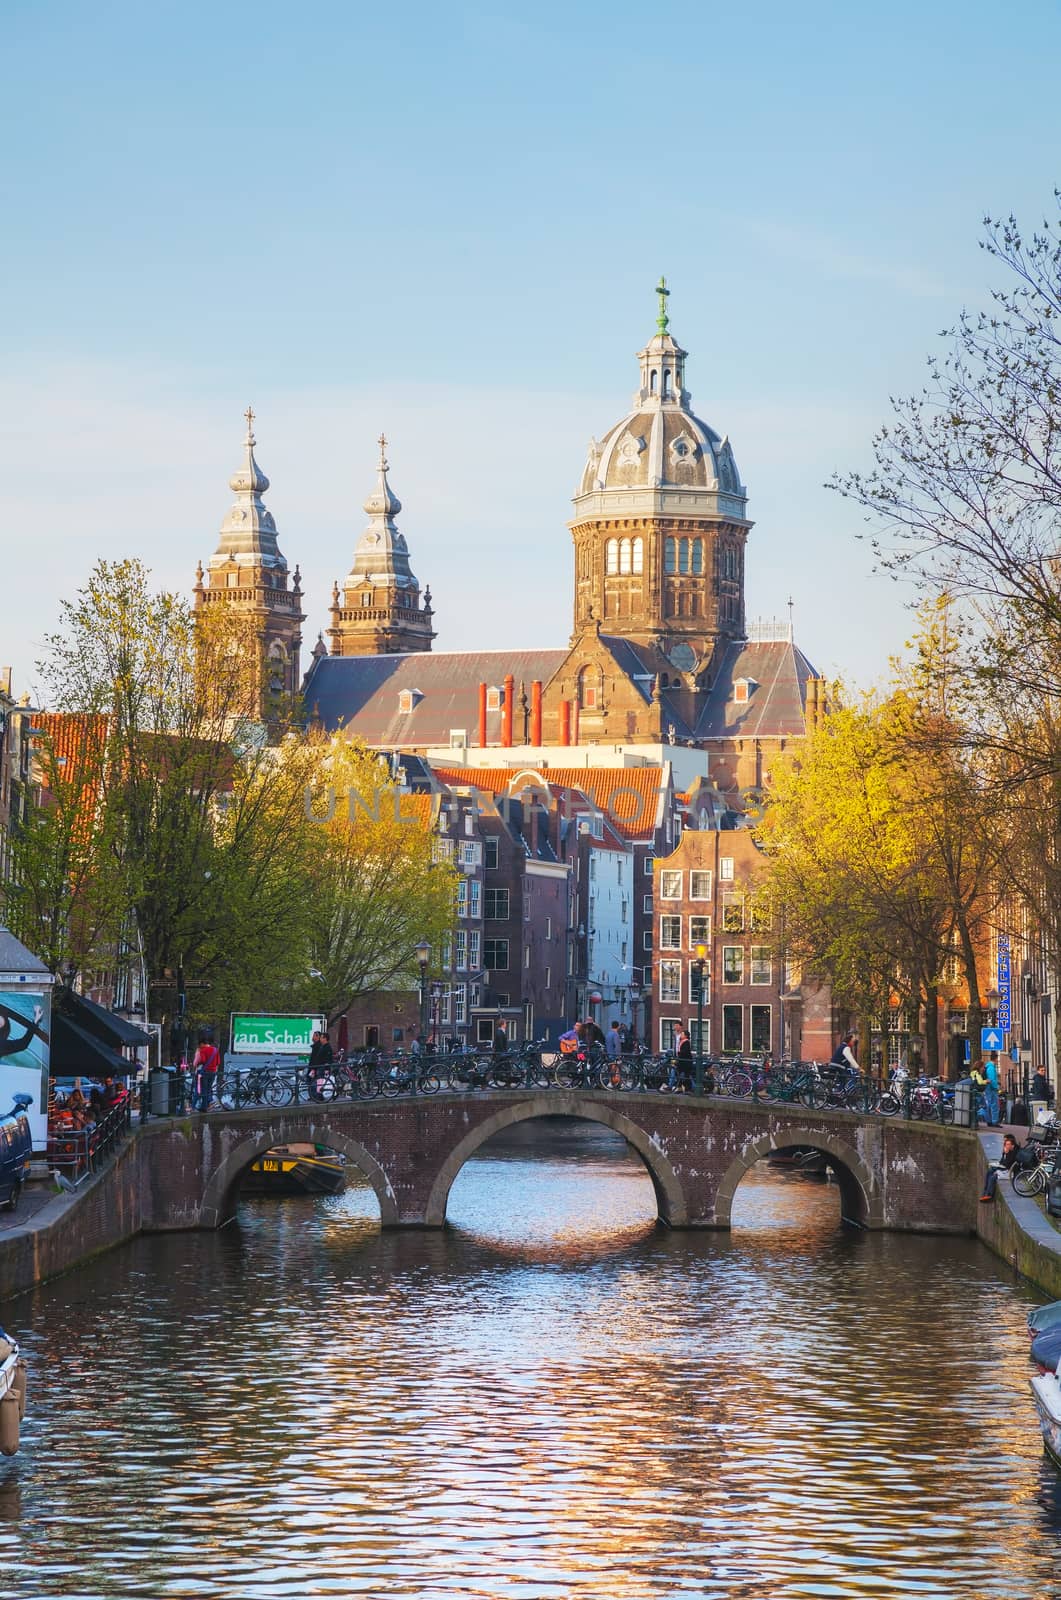 AMSTERDAM - APRIL 15: Basilica of Saint Nicholas (Sint-Nicolaasbasiliek) on April 15, 2015 in Amsterdam, Netherlands. Officially the church was called St. Nicholas inside the Walls, i.e. the oldest part of the Amsterdam defence works.